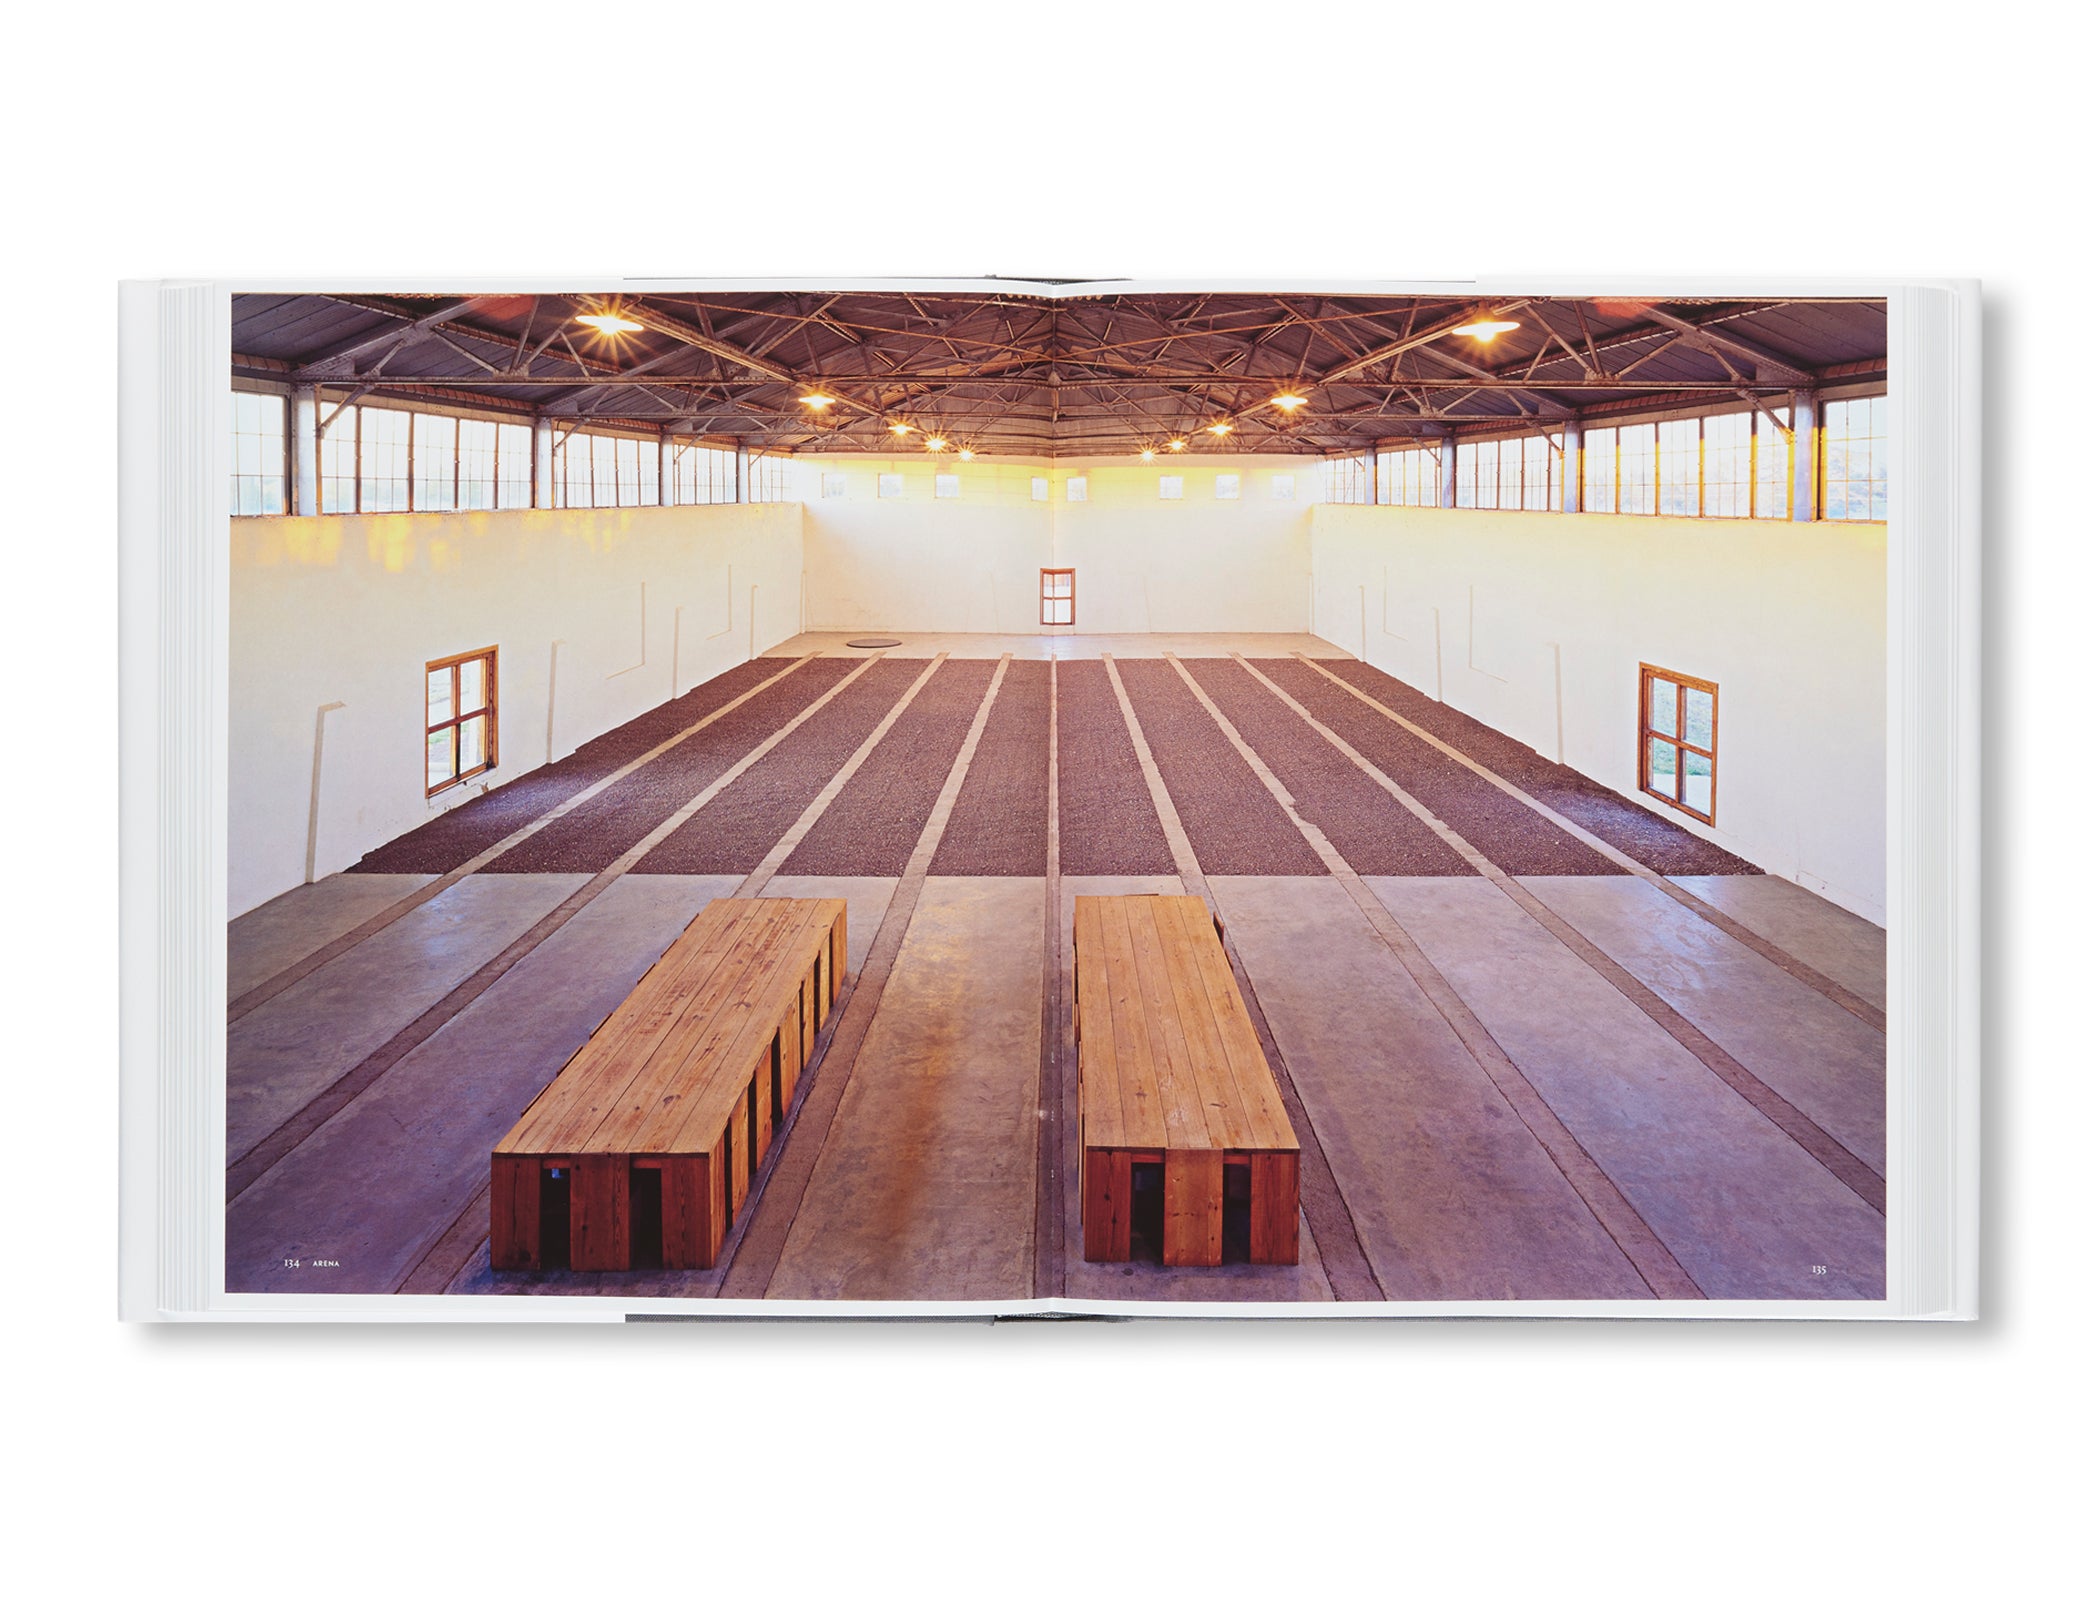 CHINATI: THE VISION OF DONALD JUDD [SECOND EDITION]